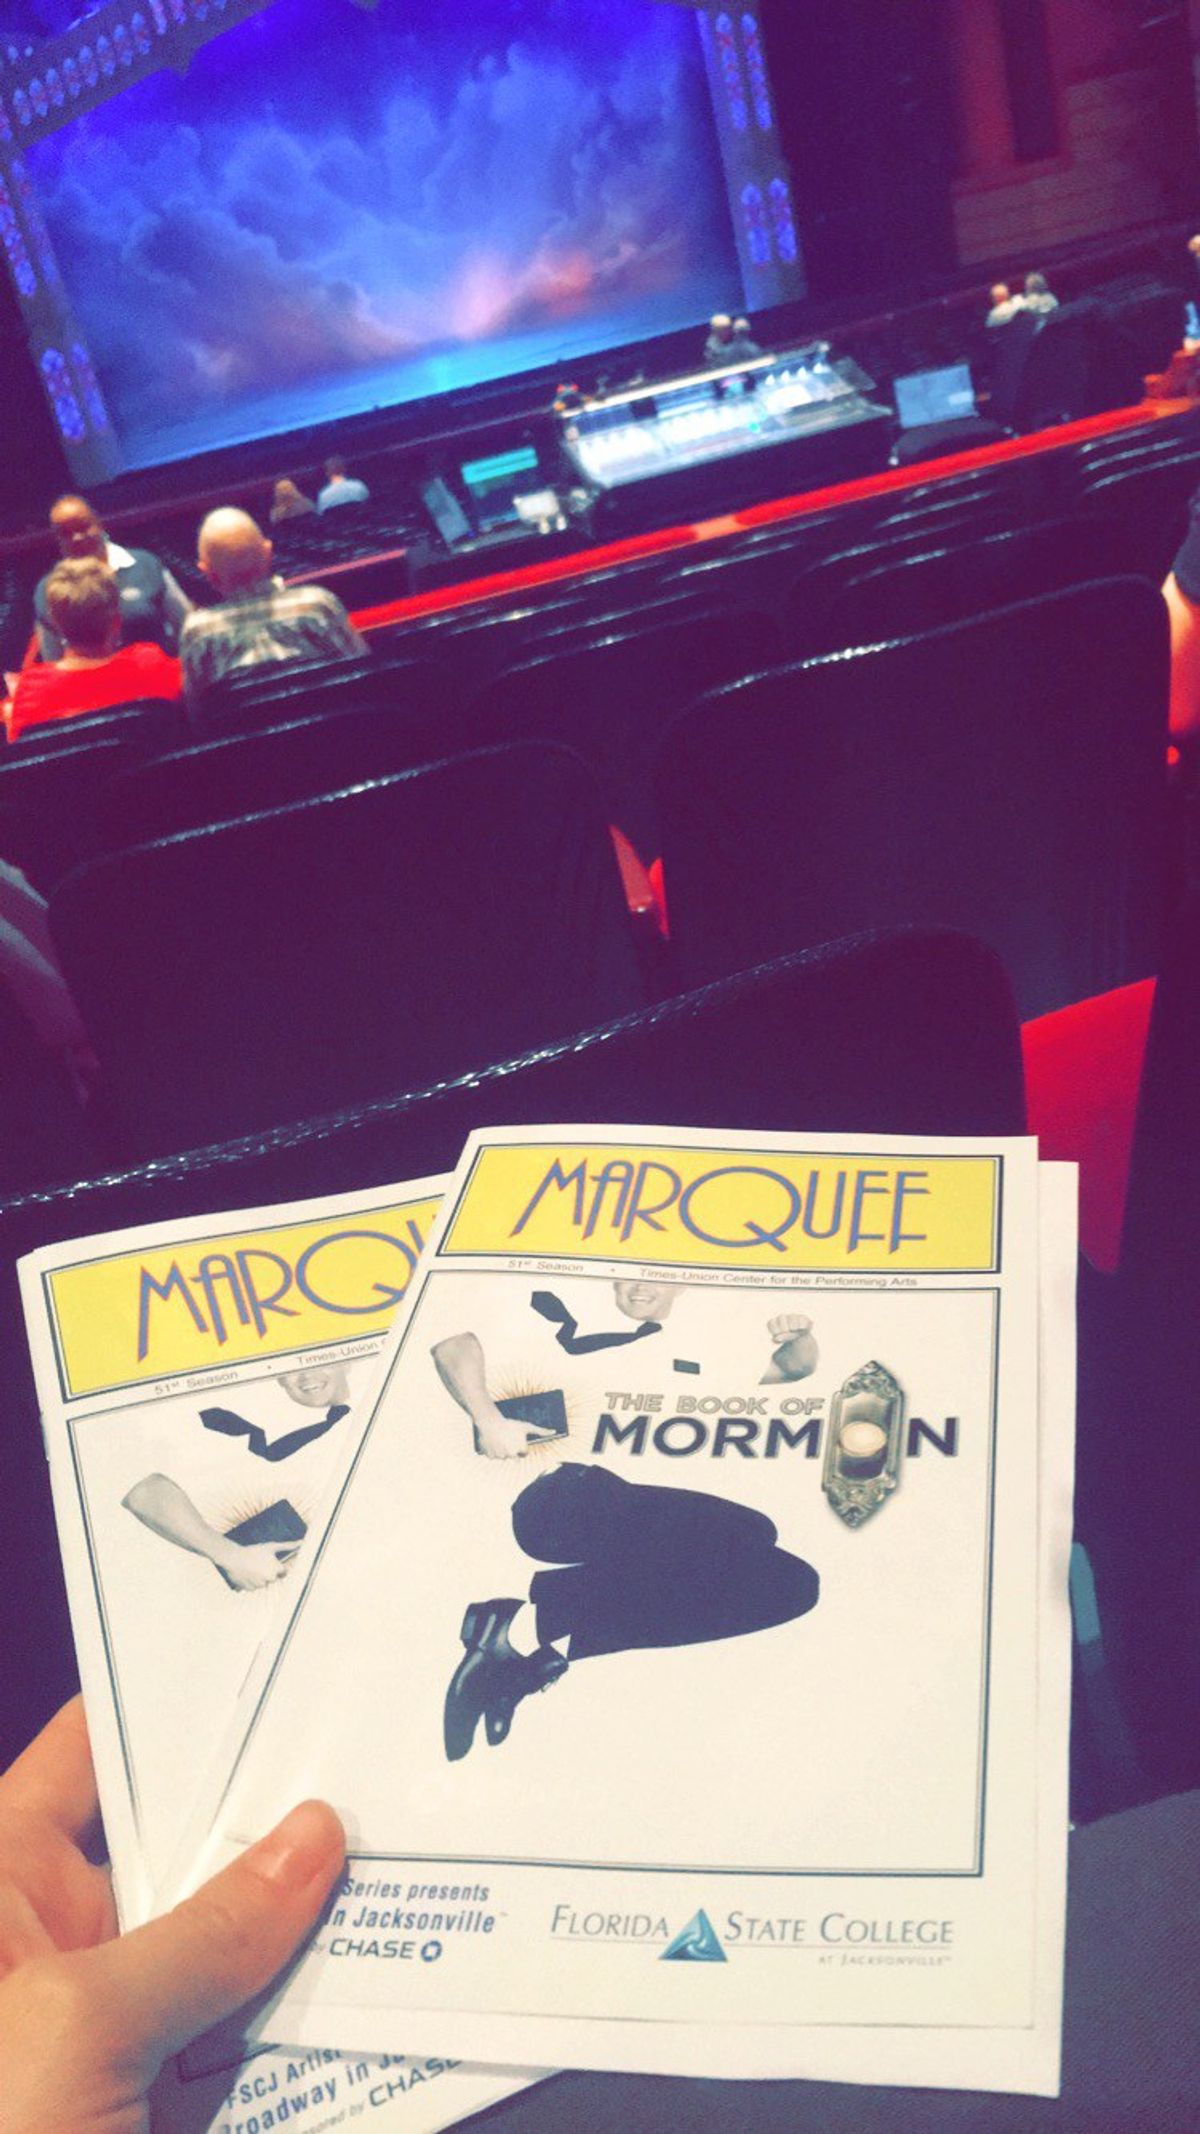 My Experience at The Book of Mormon